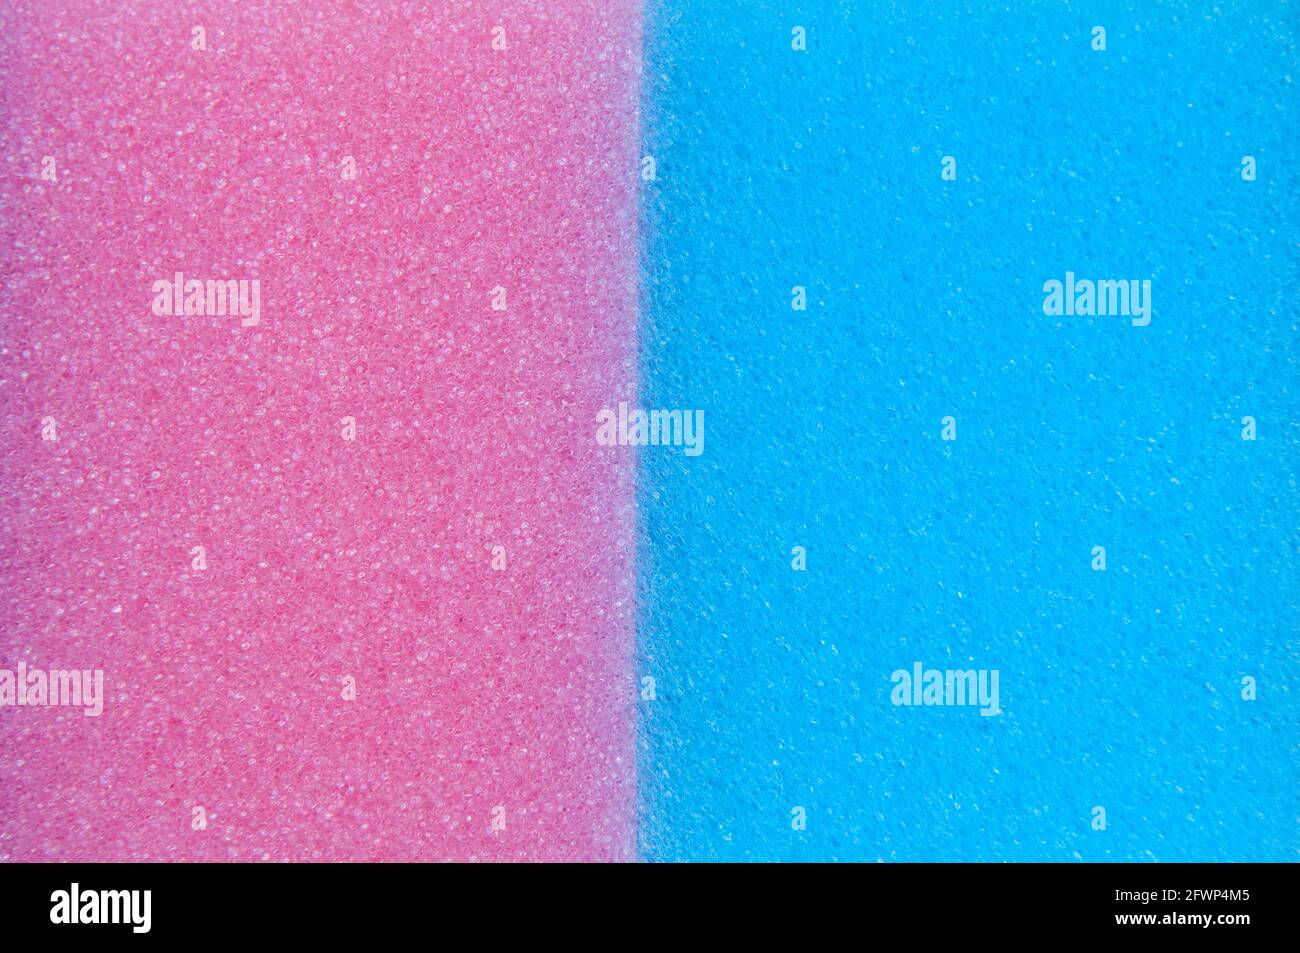 A Close Up Shot Of Two Washing Up Sponges, One Pink and One Blue, Next To Each Other Stock Photo